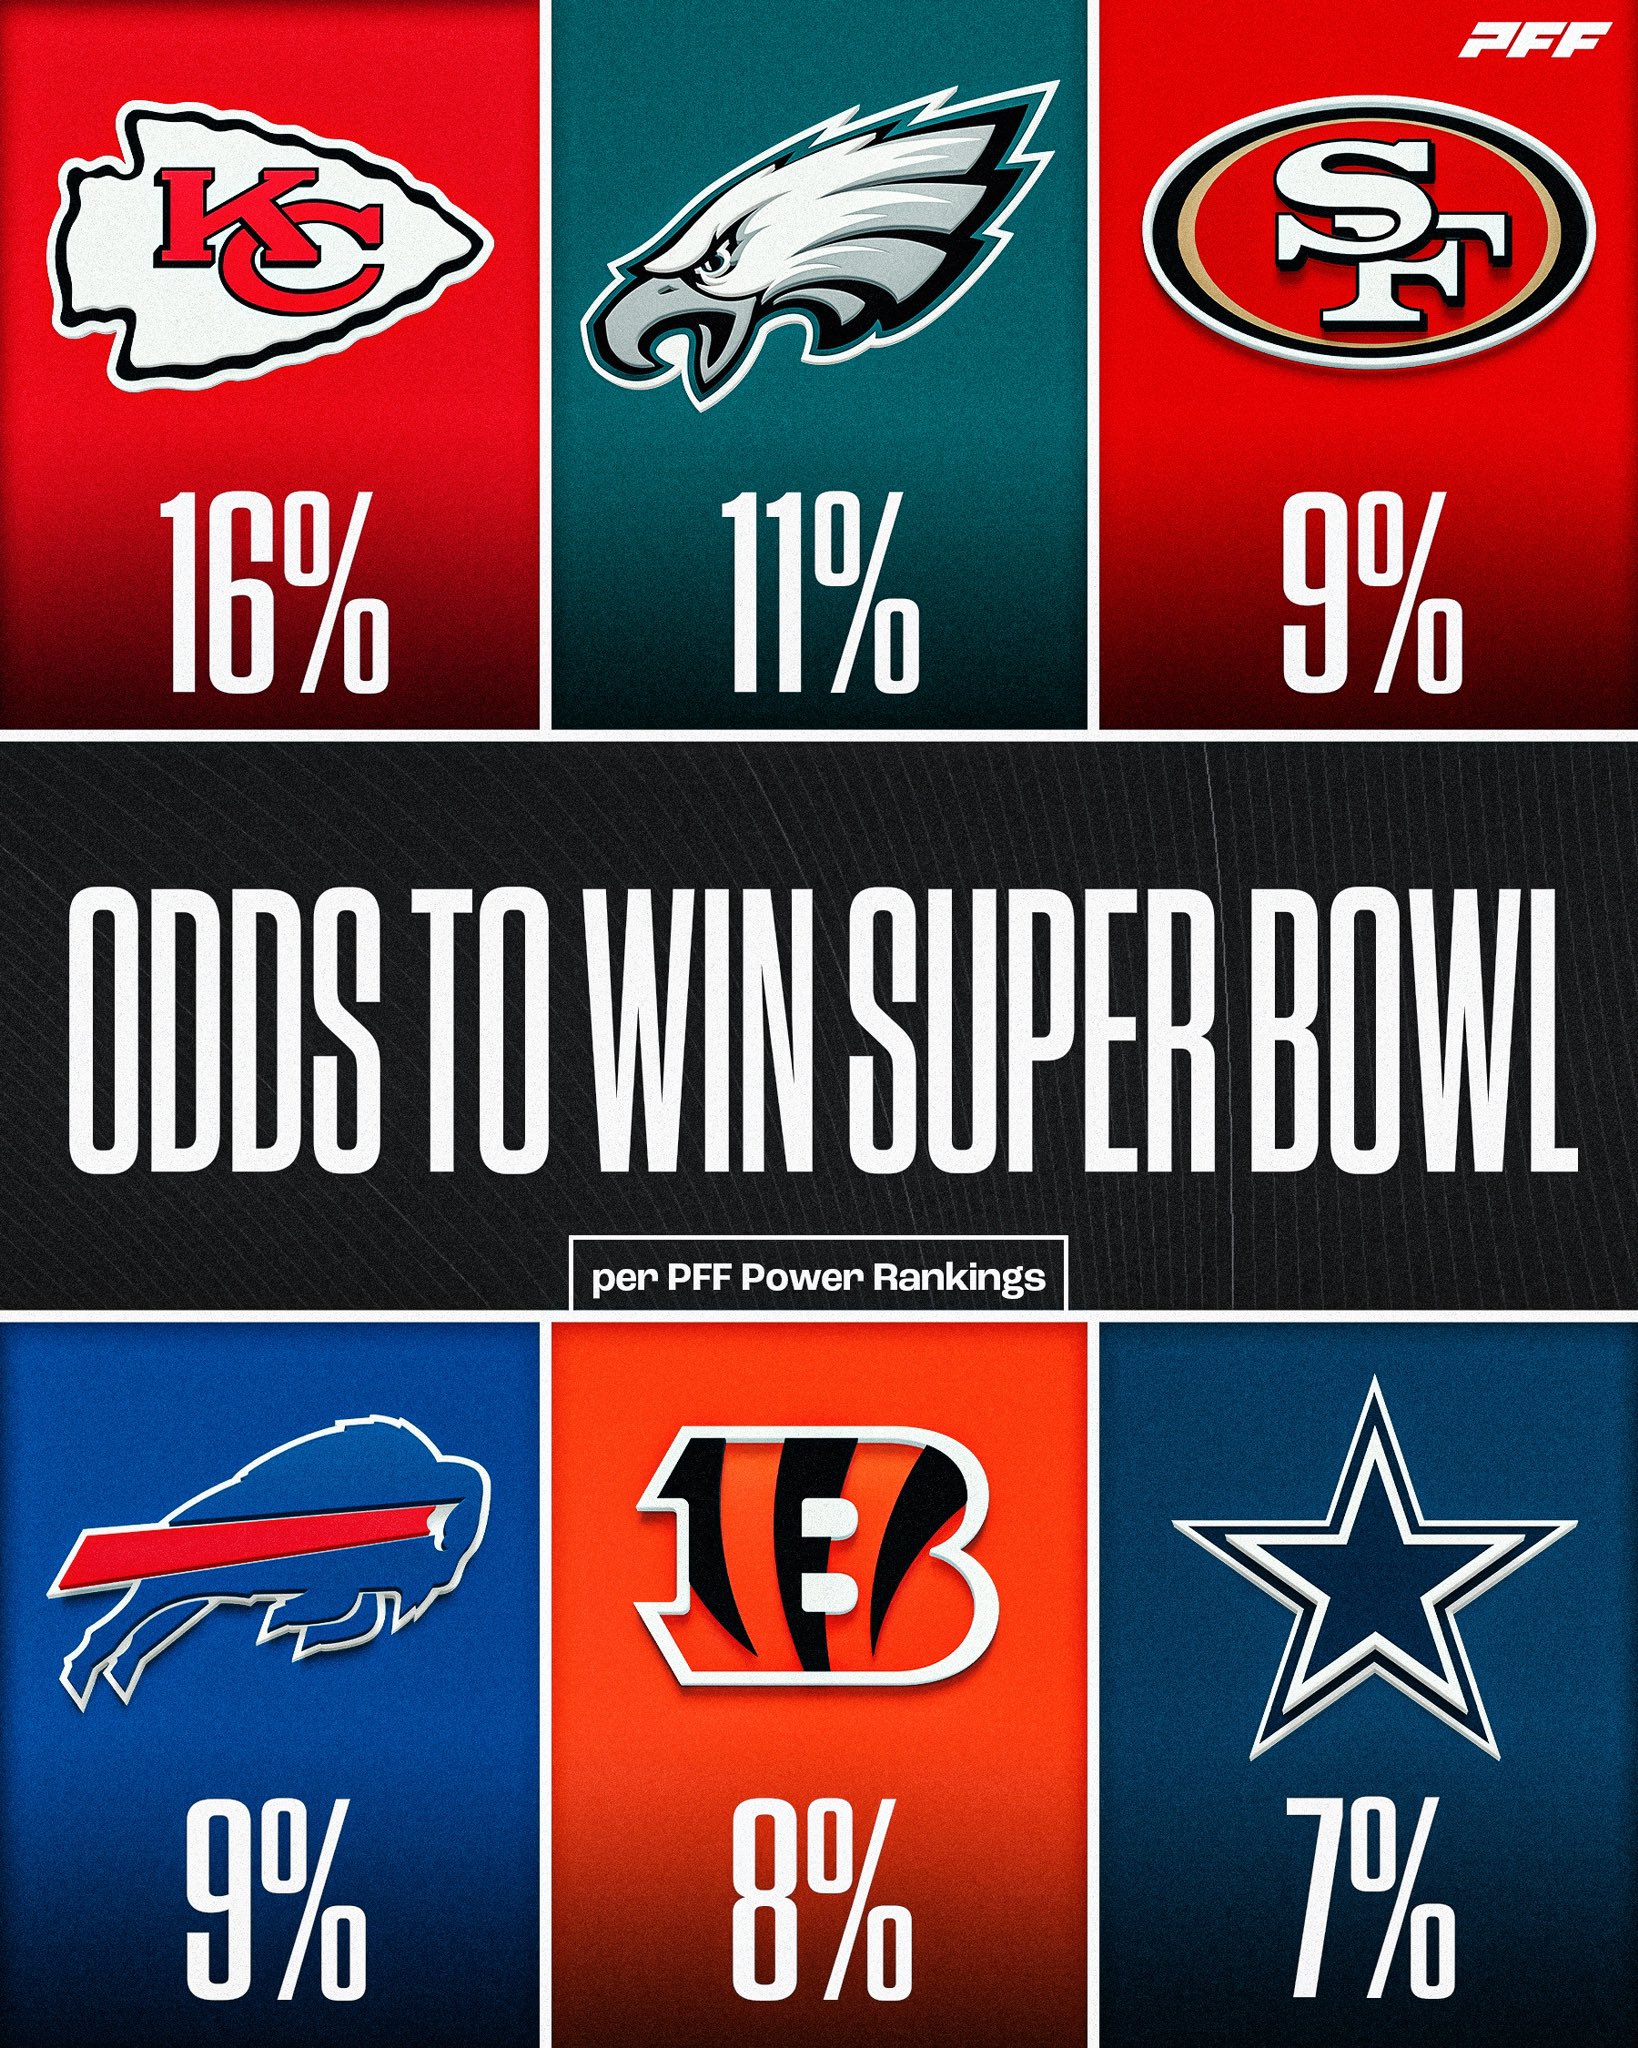 PFF on X: 'The best odds to win the Super Bowl, per our Power